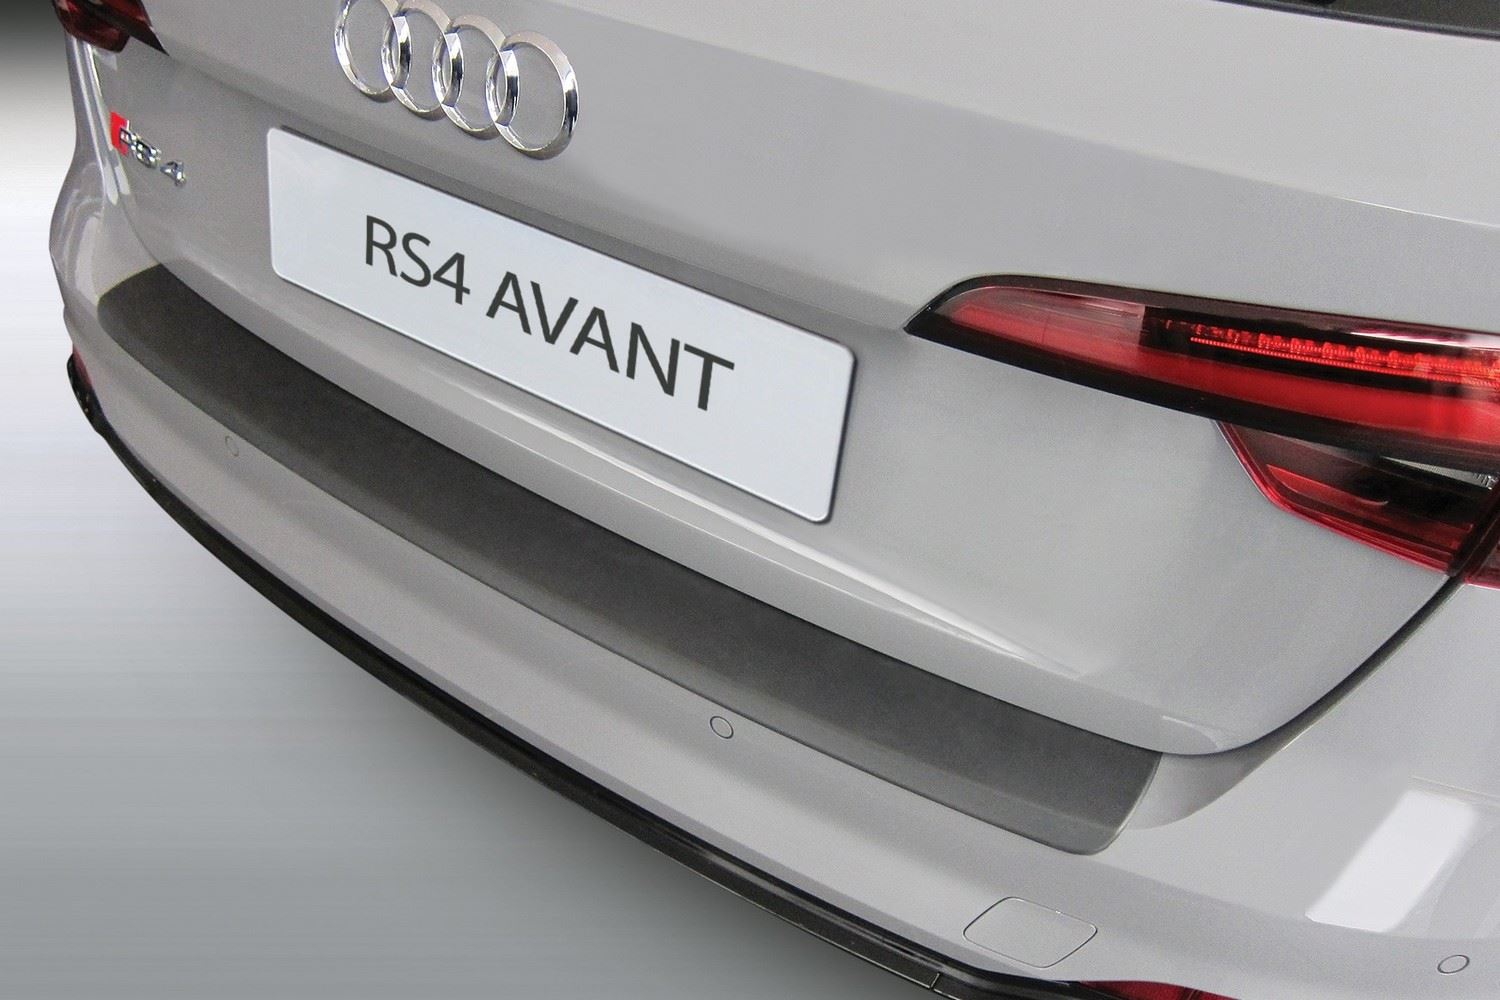 Rear bumper protector Audi A4 Avant (B9) stainless steel - Strong